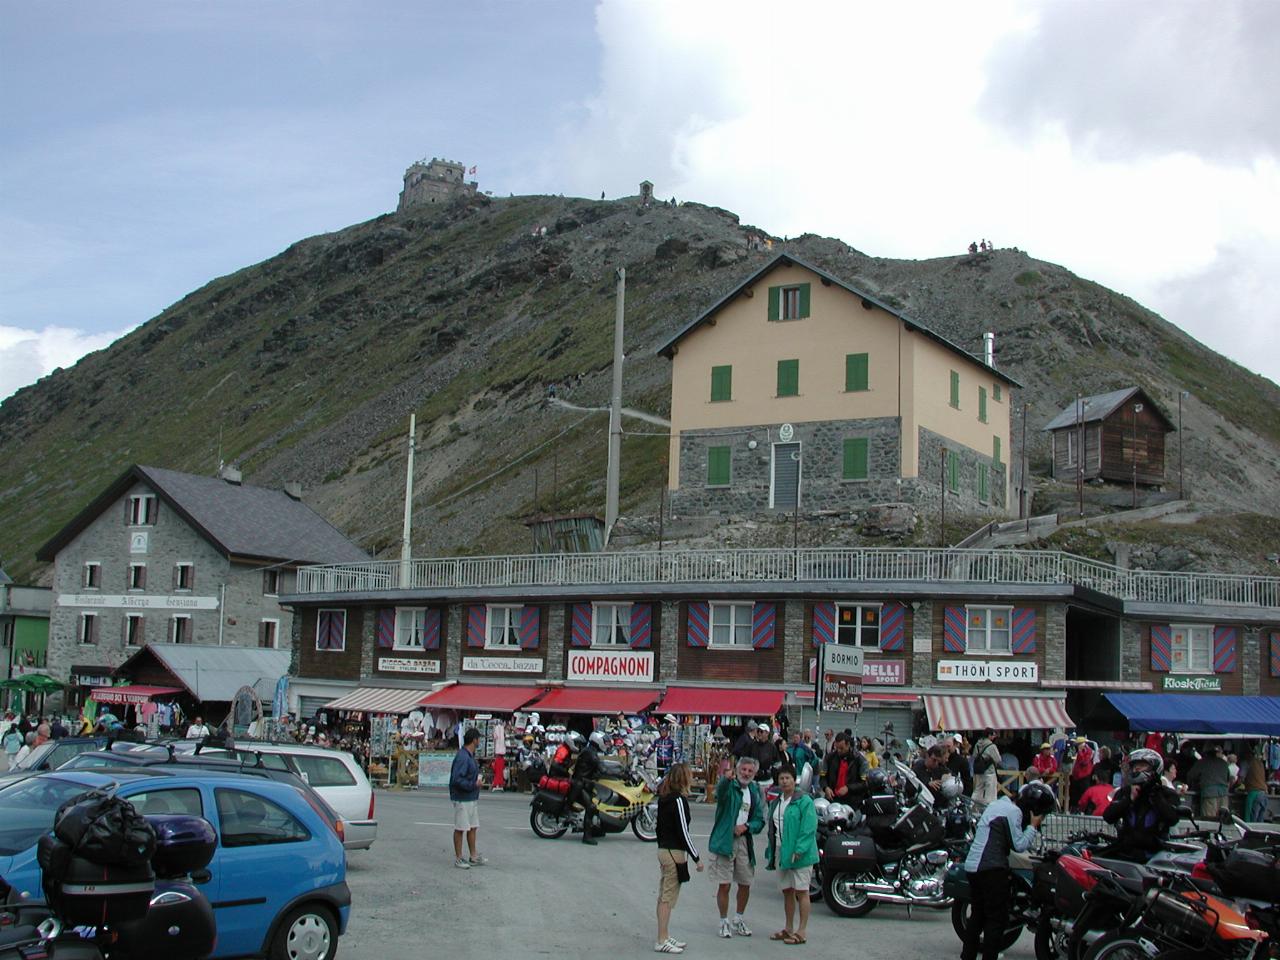 Fort atop pass;  generally busy tourist area, with plenty of bikes and bikers